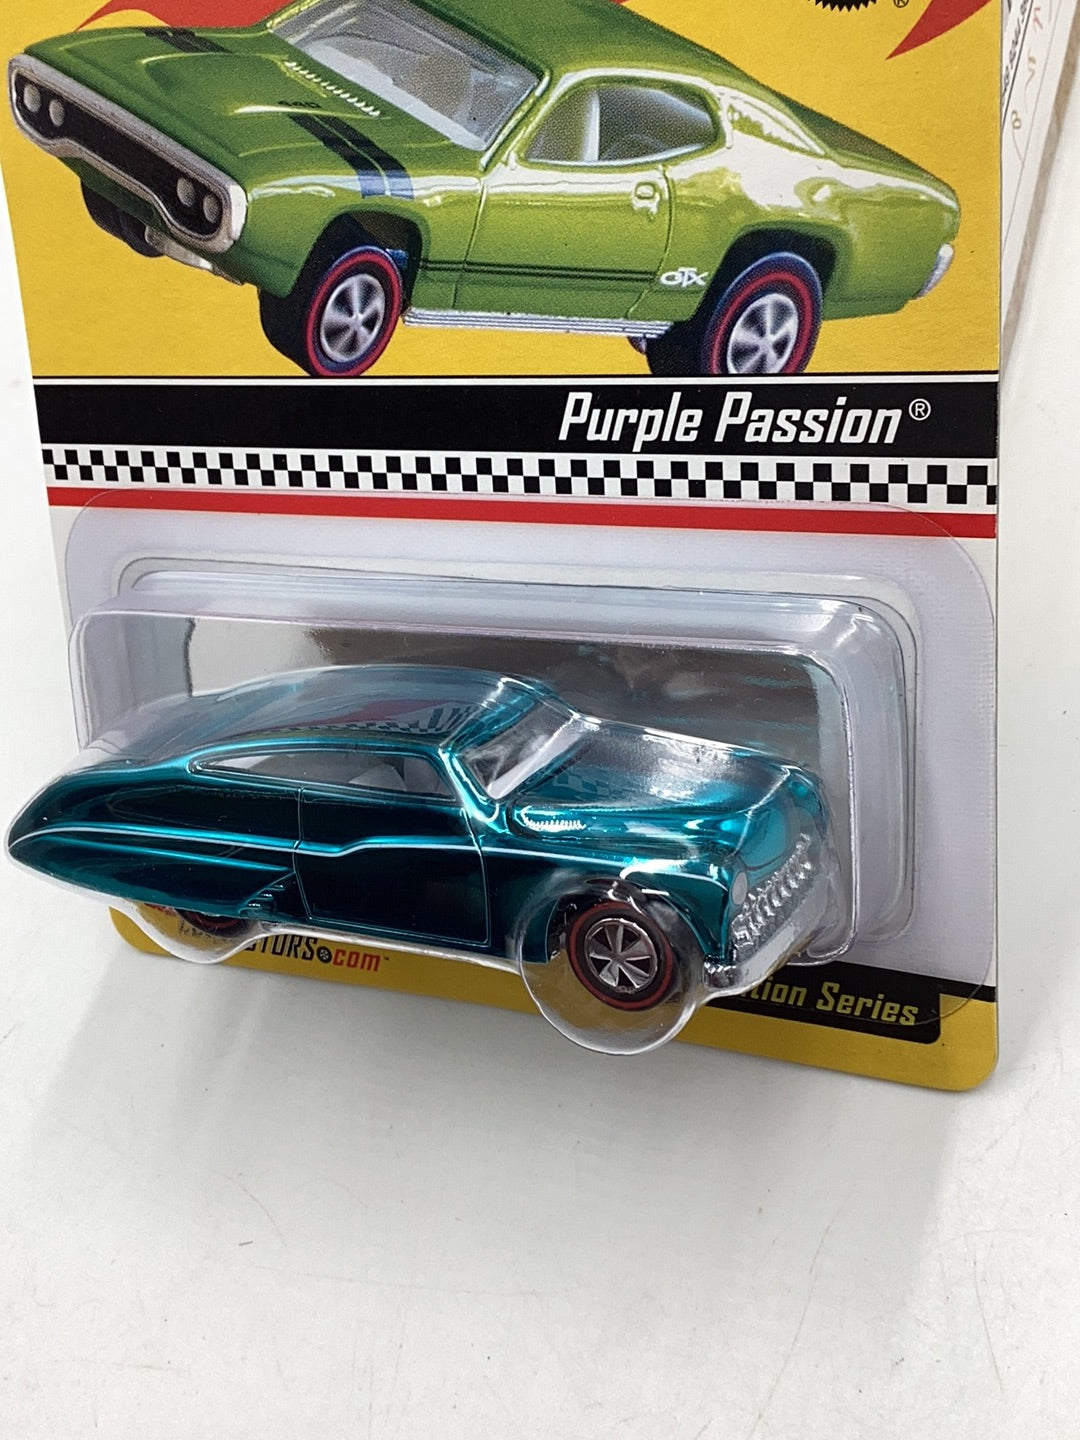 2006 hot wheels 6th annual collectors nationals Purple Passion 5951/10000 Convention series with protector